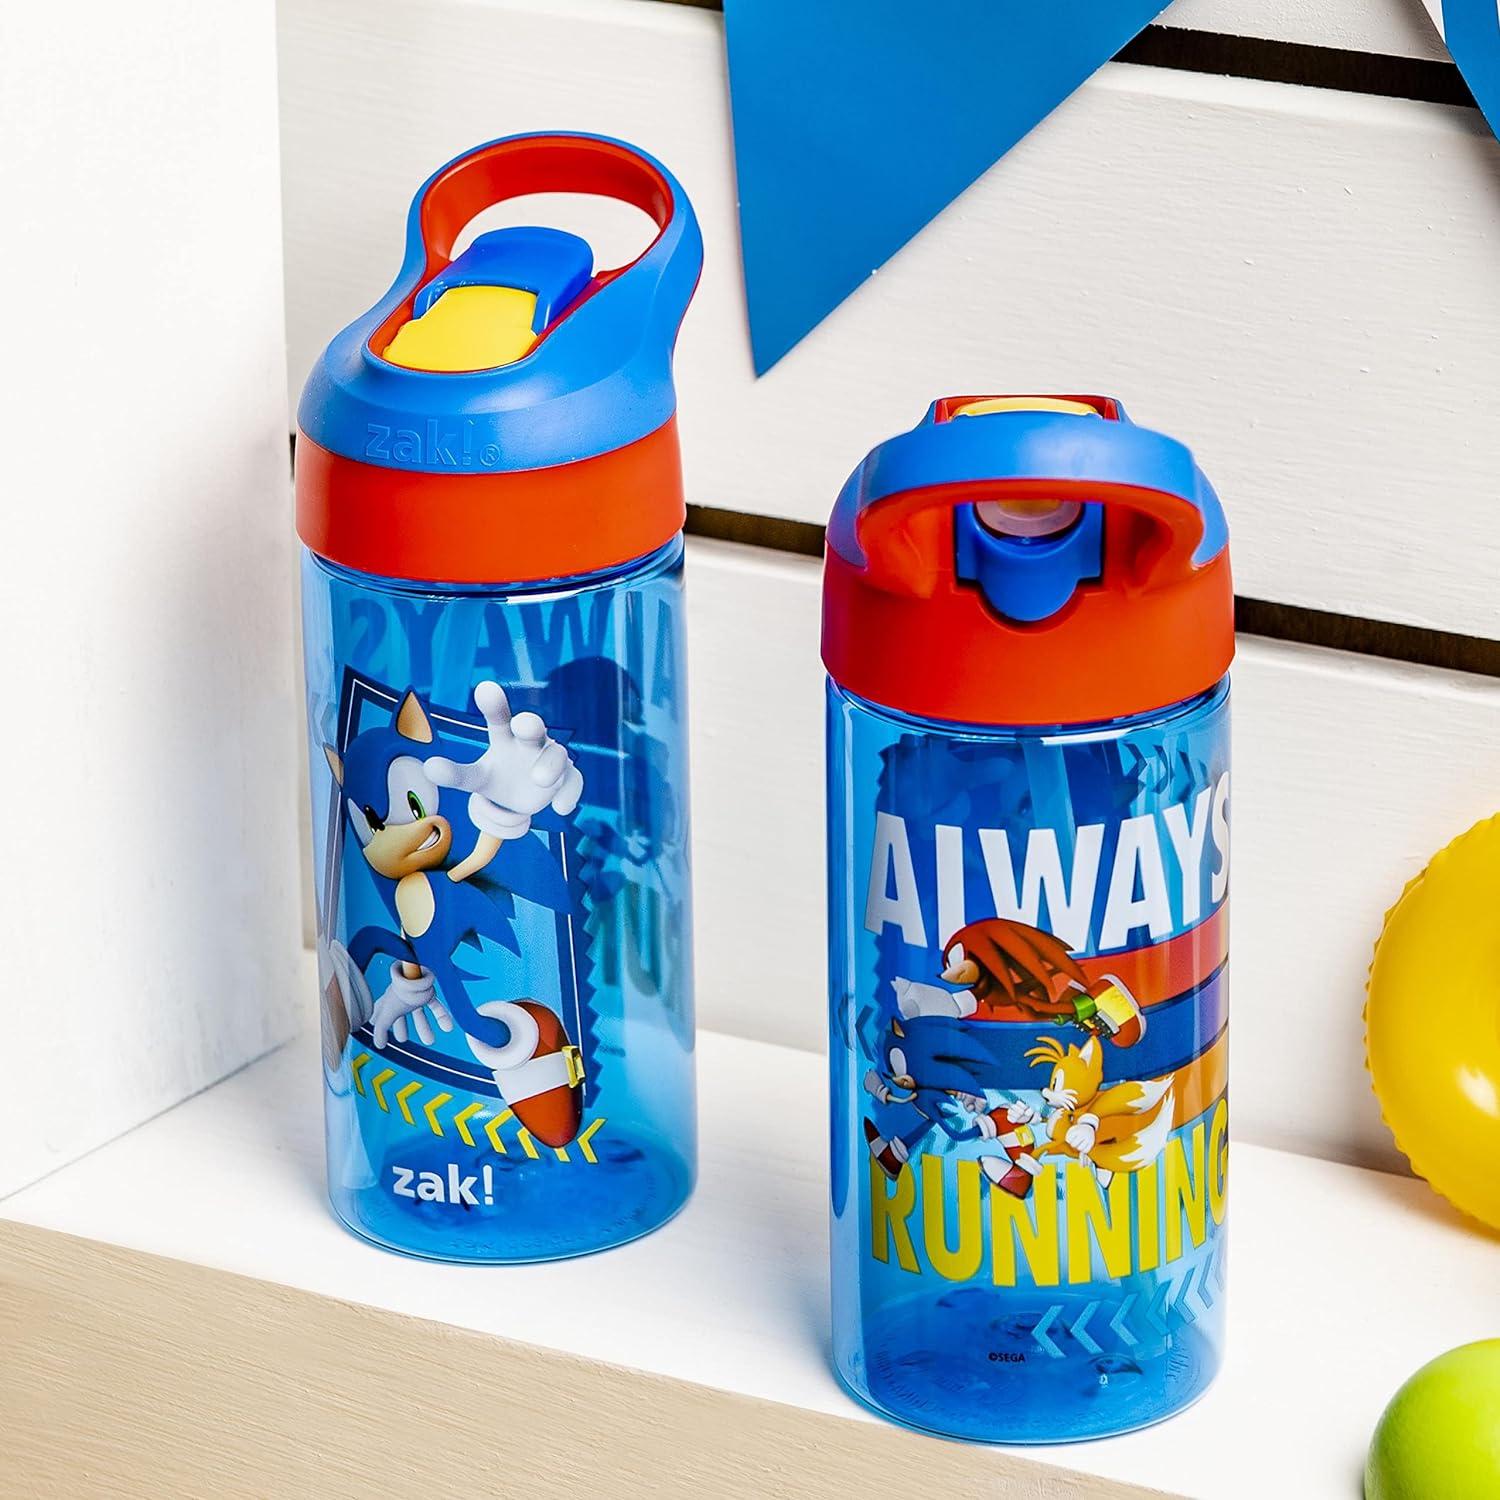 The First Years Bluey Sip & See™ Toddler Water Bottle with